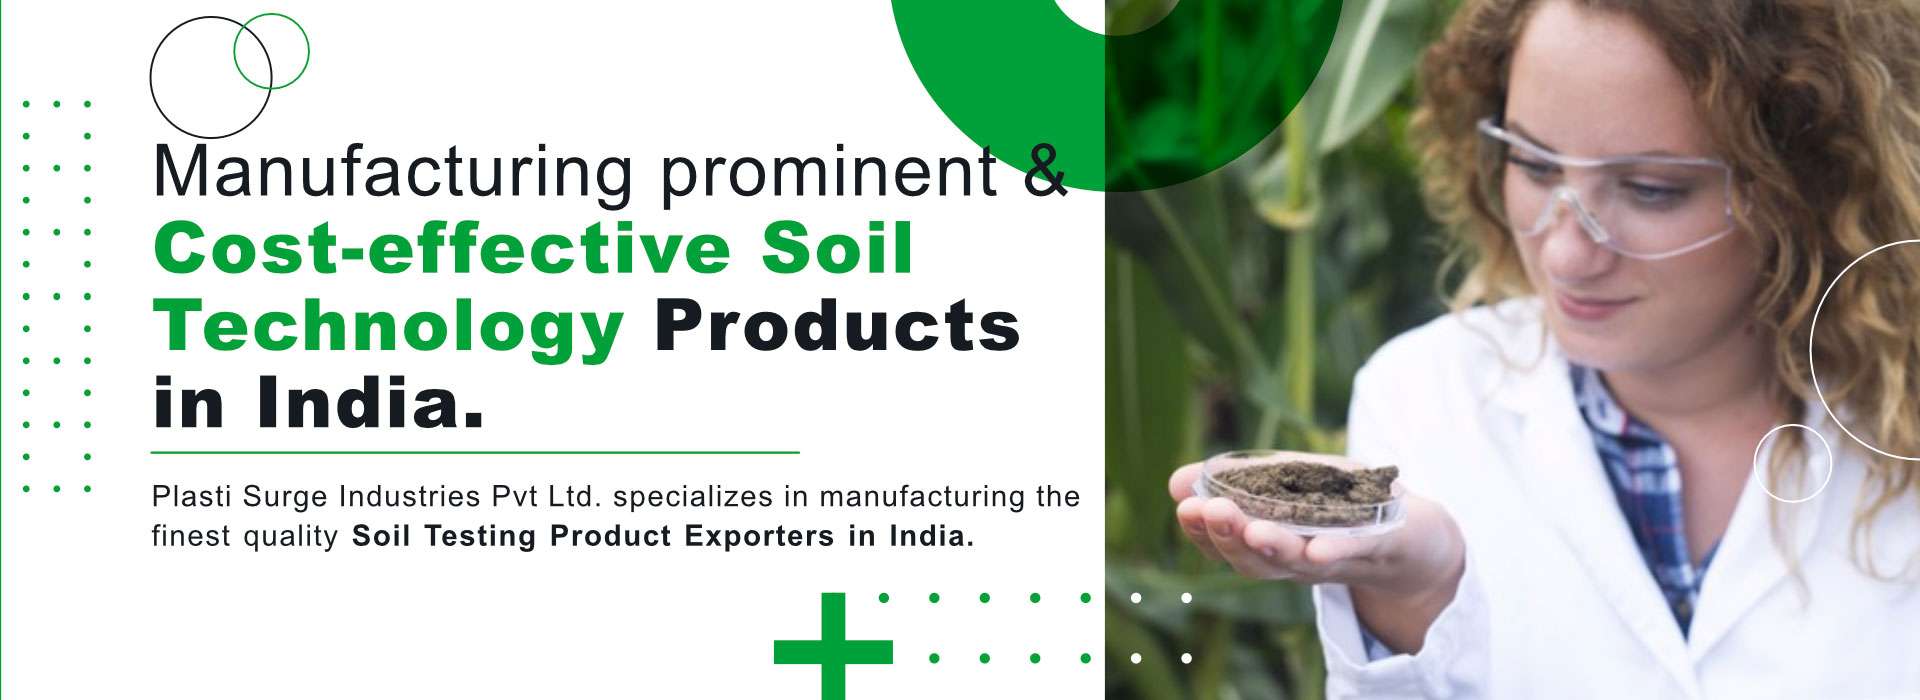  Manufacturing prominent & cost effective Soil Technology Products in India Manufacturers in 